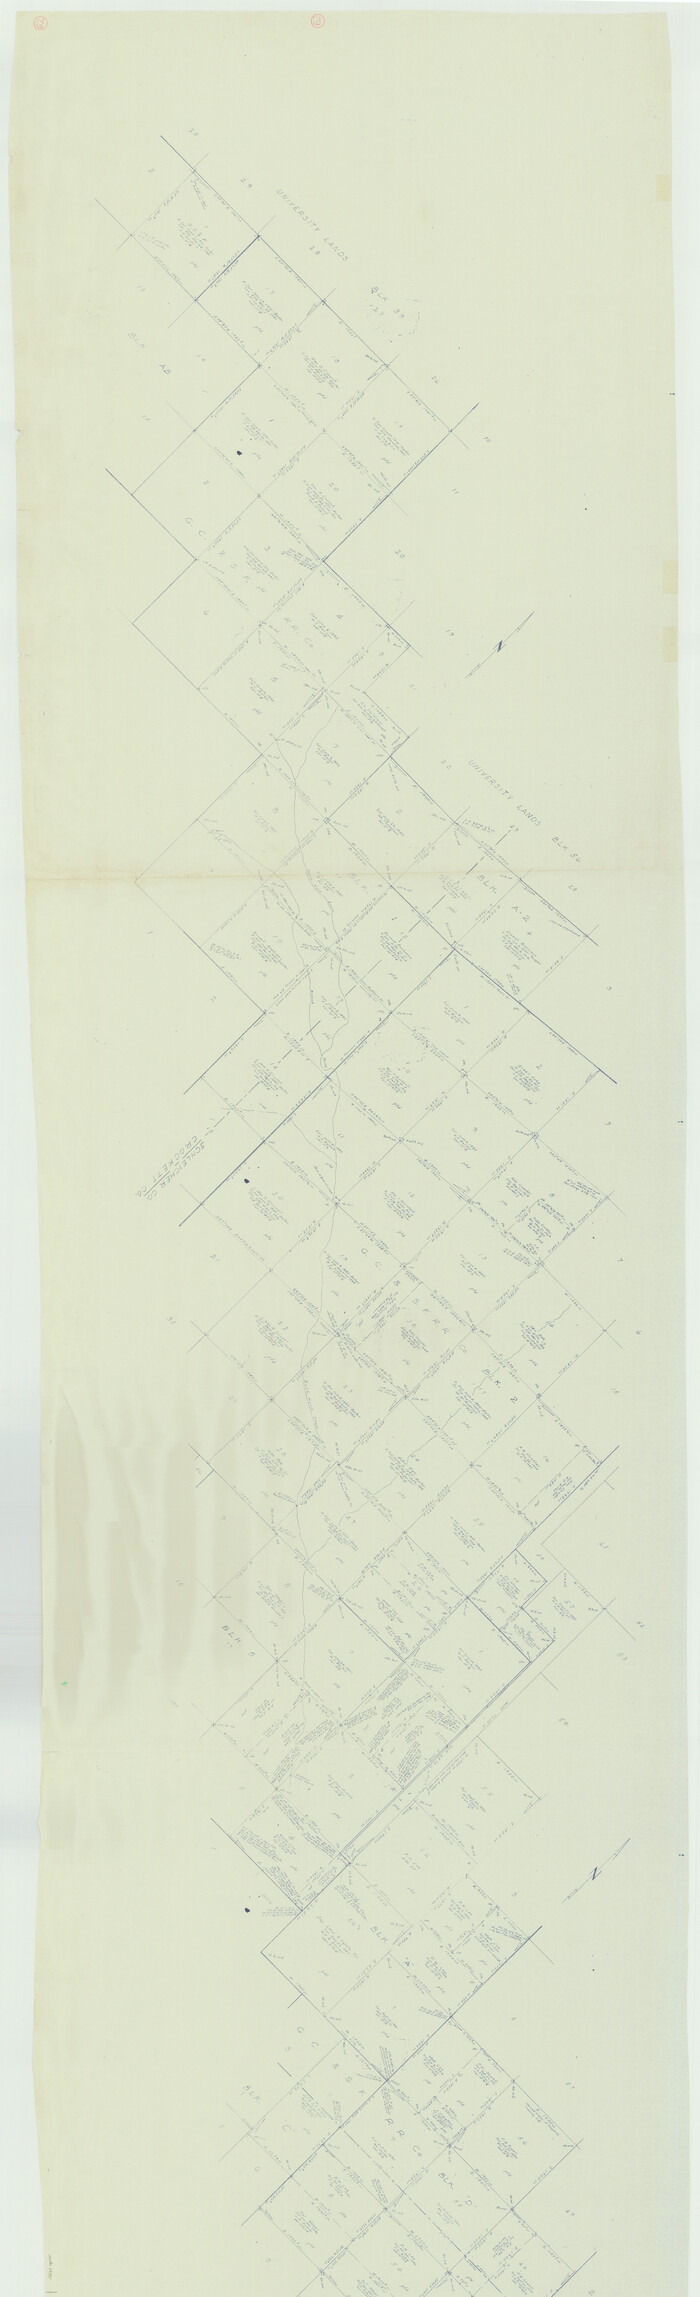 68395, Crockett County Working Sketch 62, General Map Collection